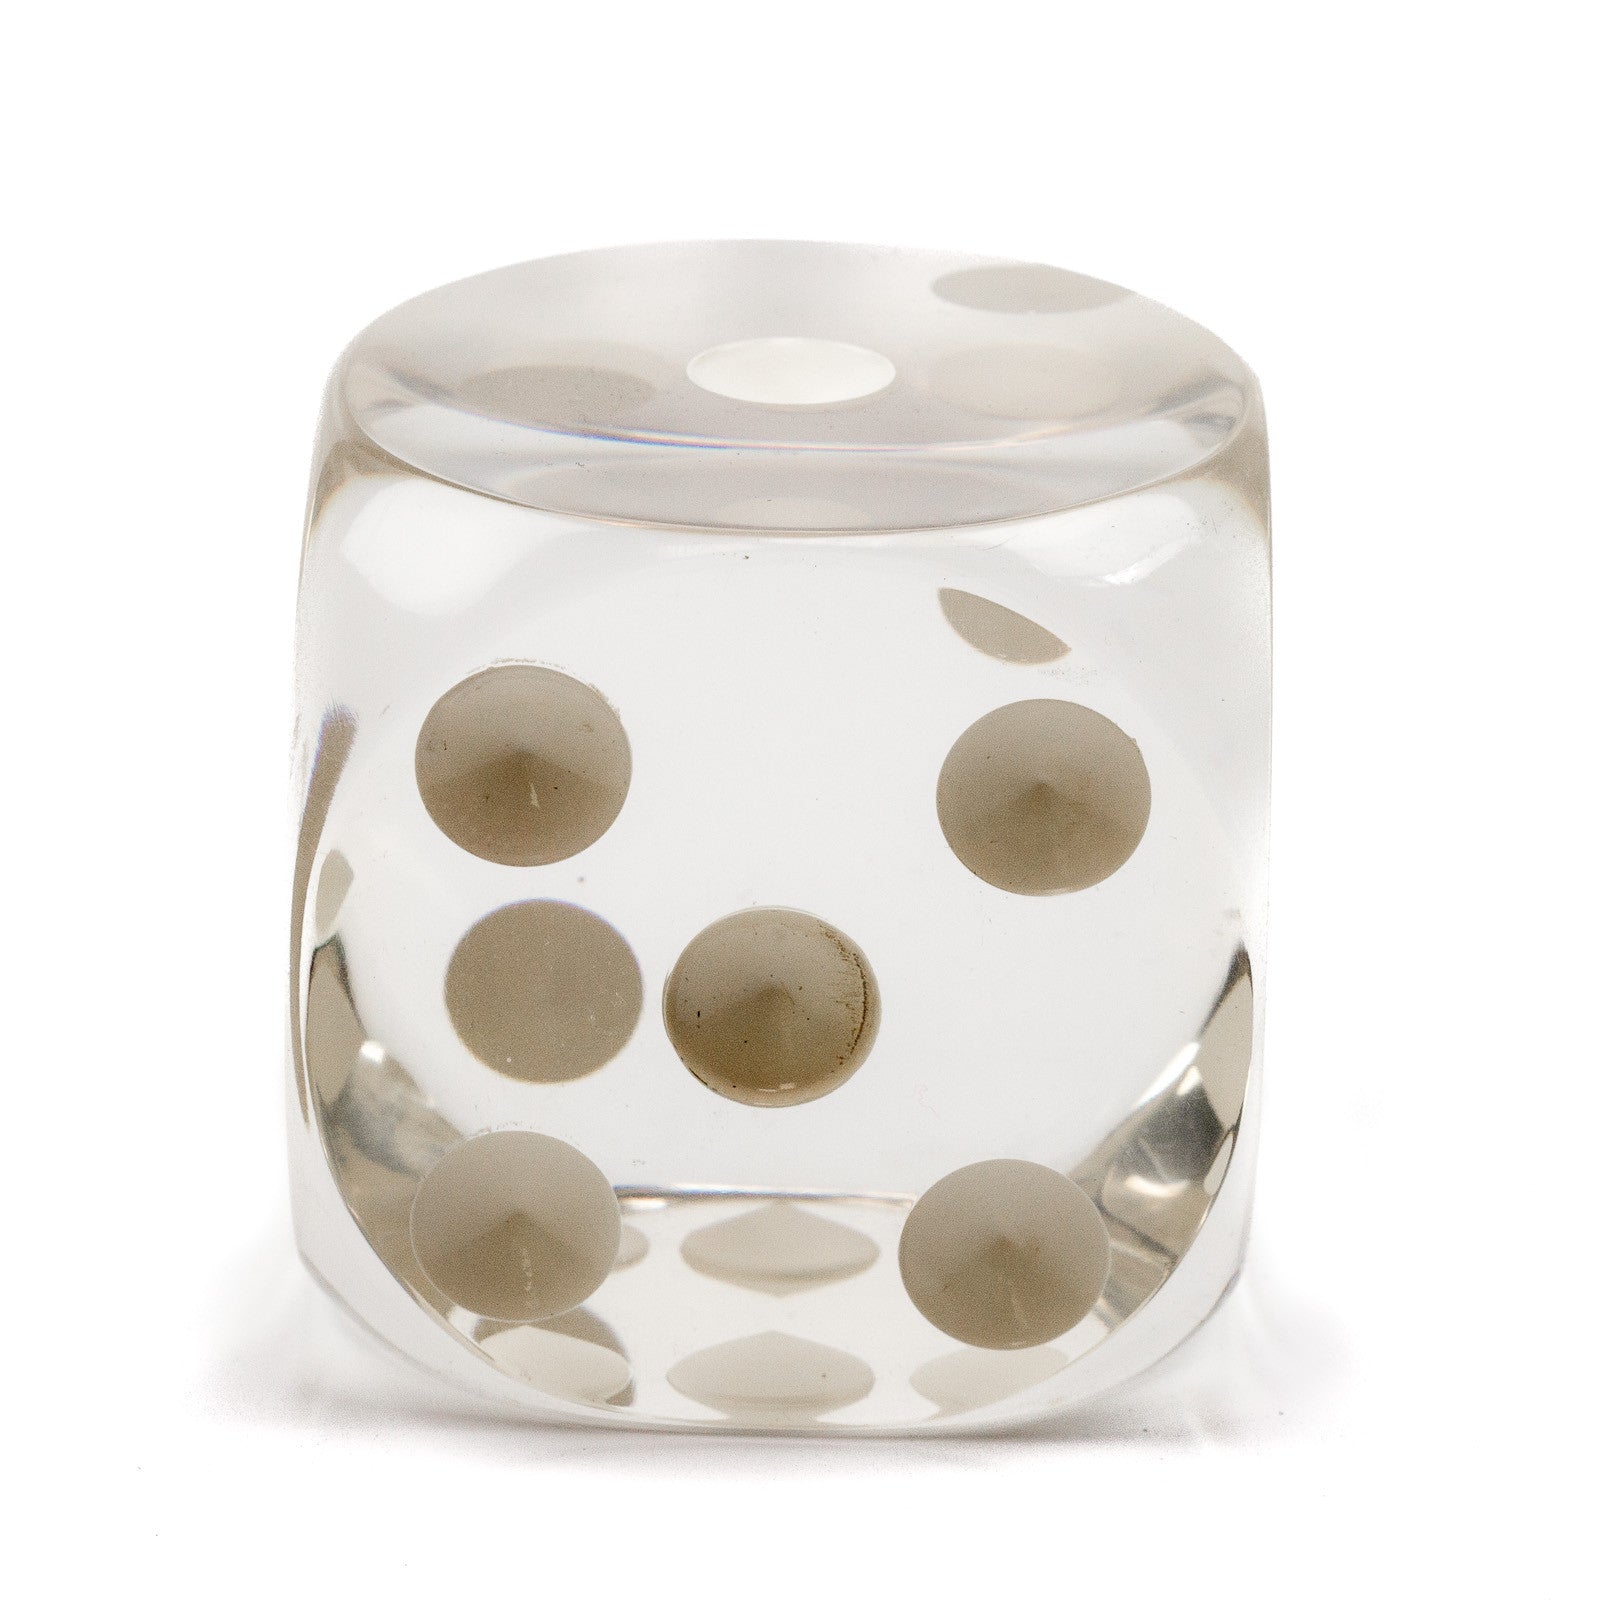 Acrylic Transparent Dice - 70 mm / 2.75 inch -  Sold Individually - Casino Supply - 2